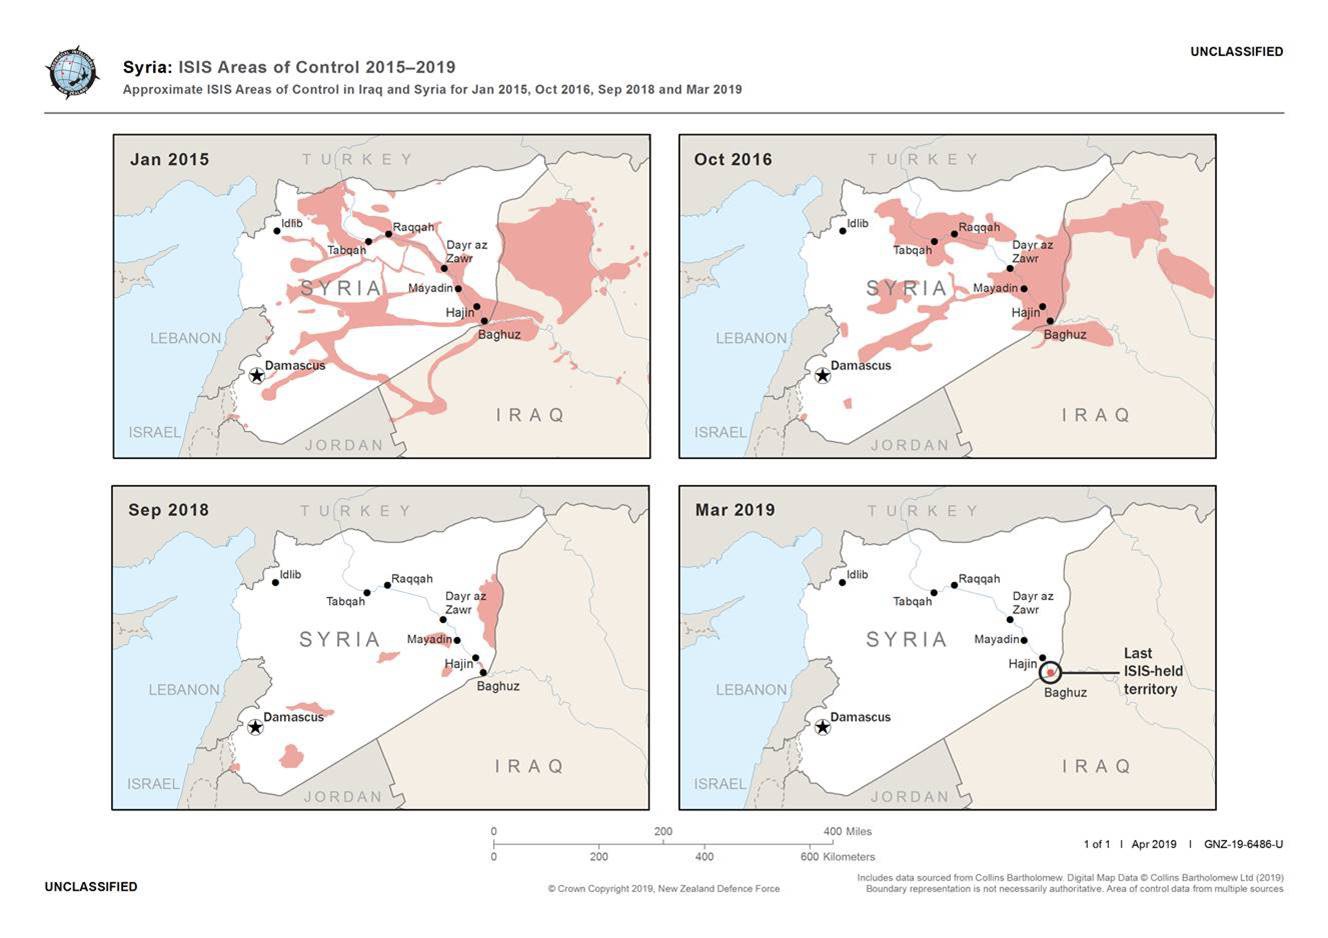 maps showing variation in IS control of Syria, restricted to only Baghuz in March 2019